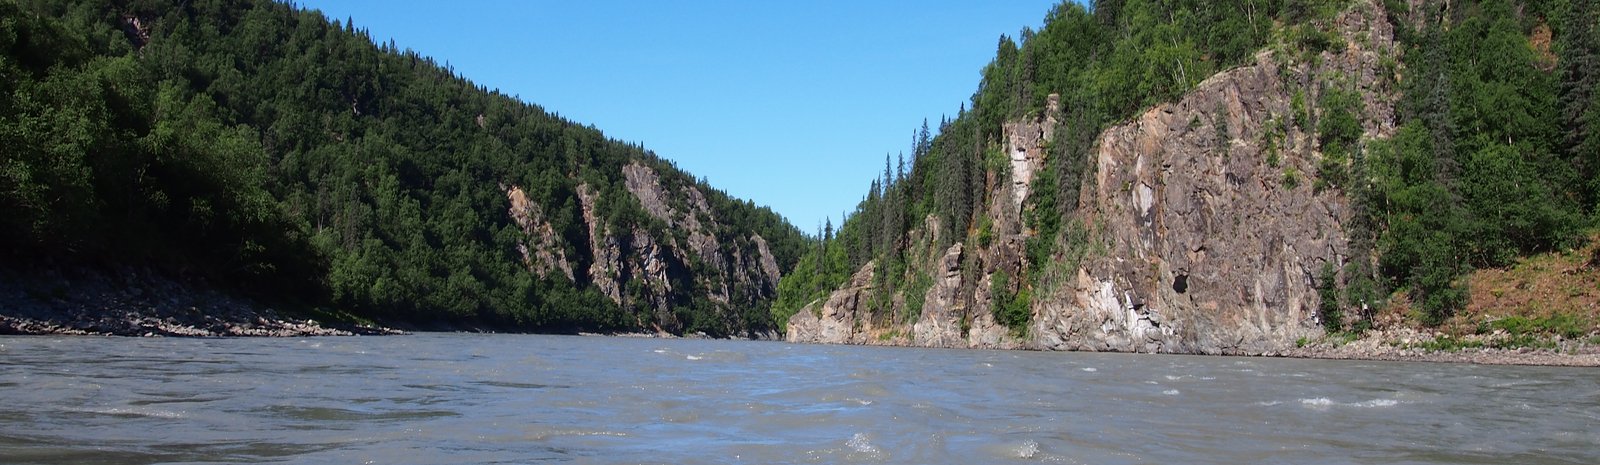 Susitna-Watana Hydroelectric Project